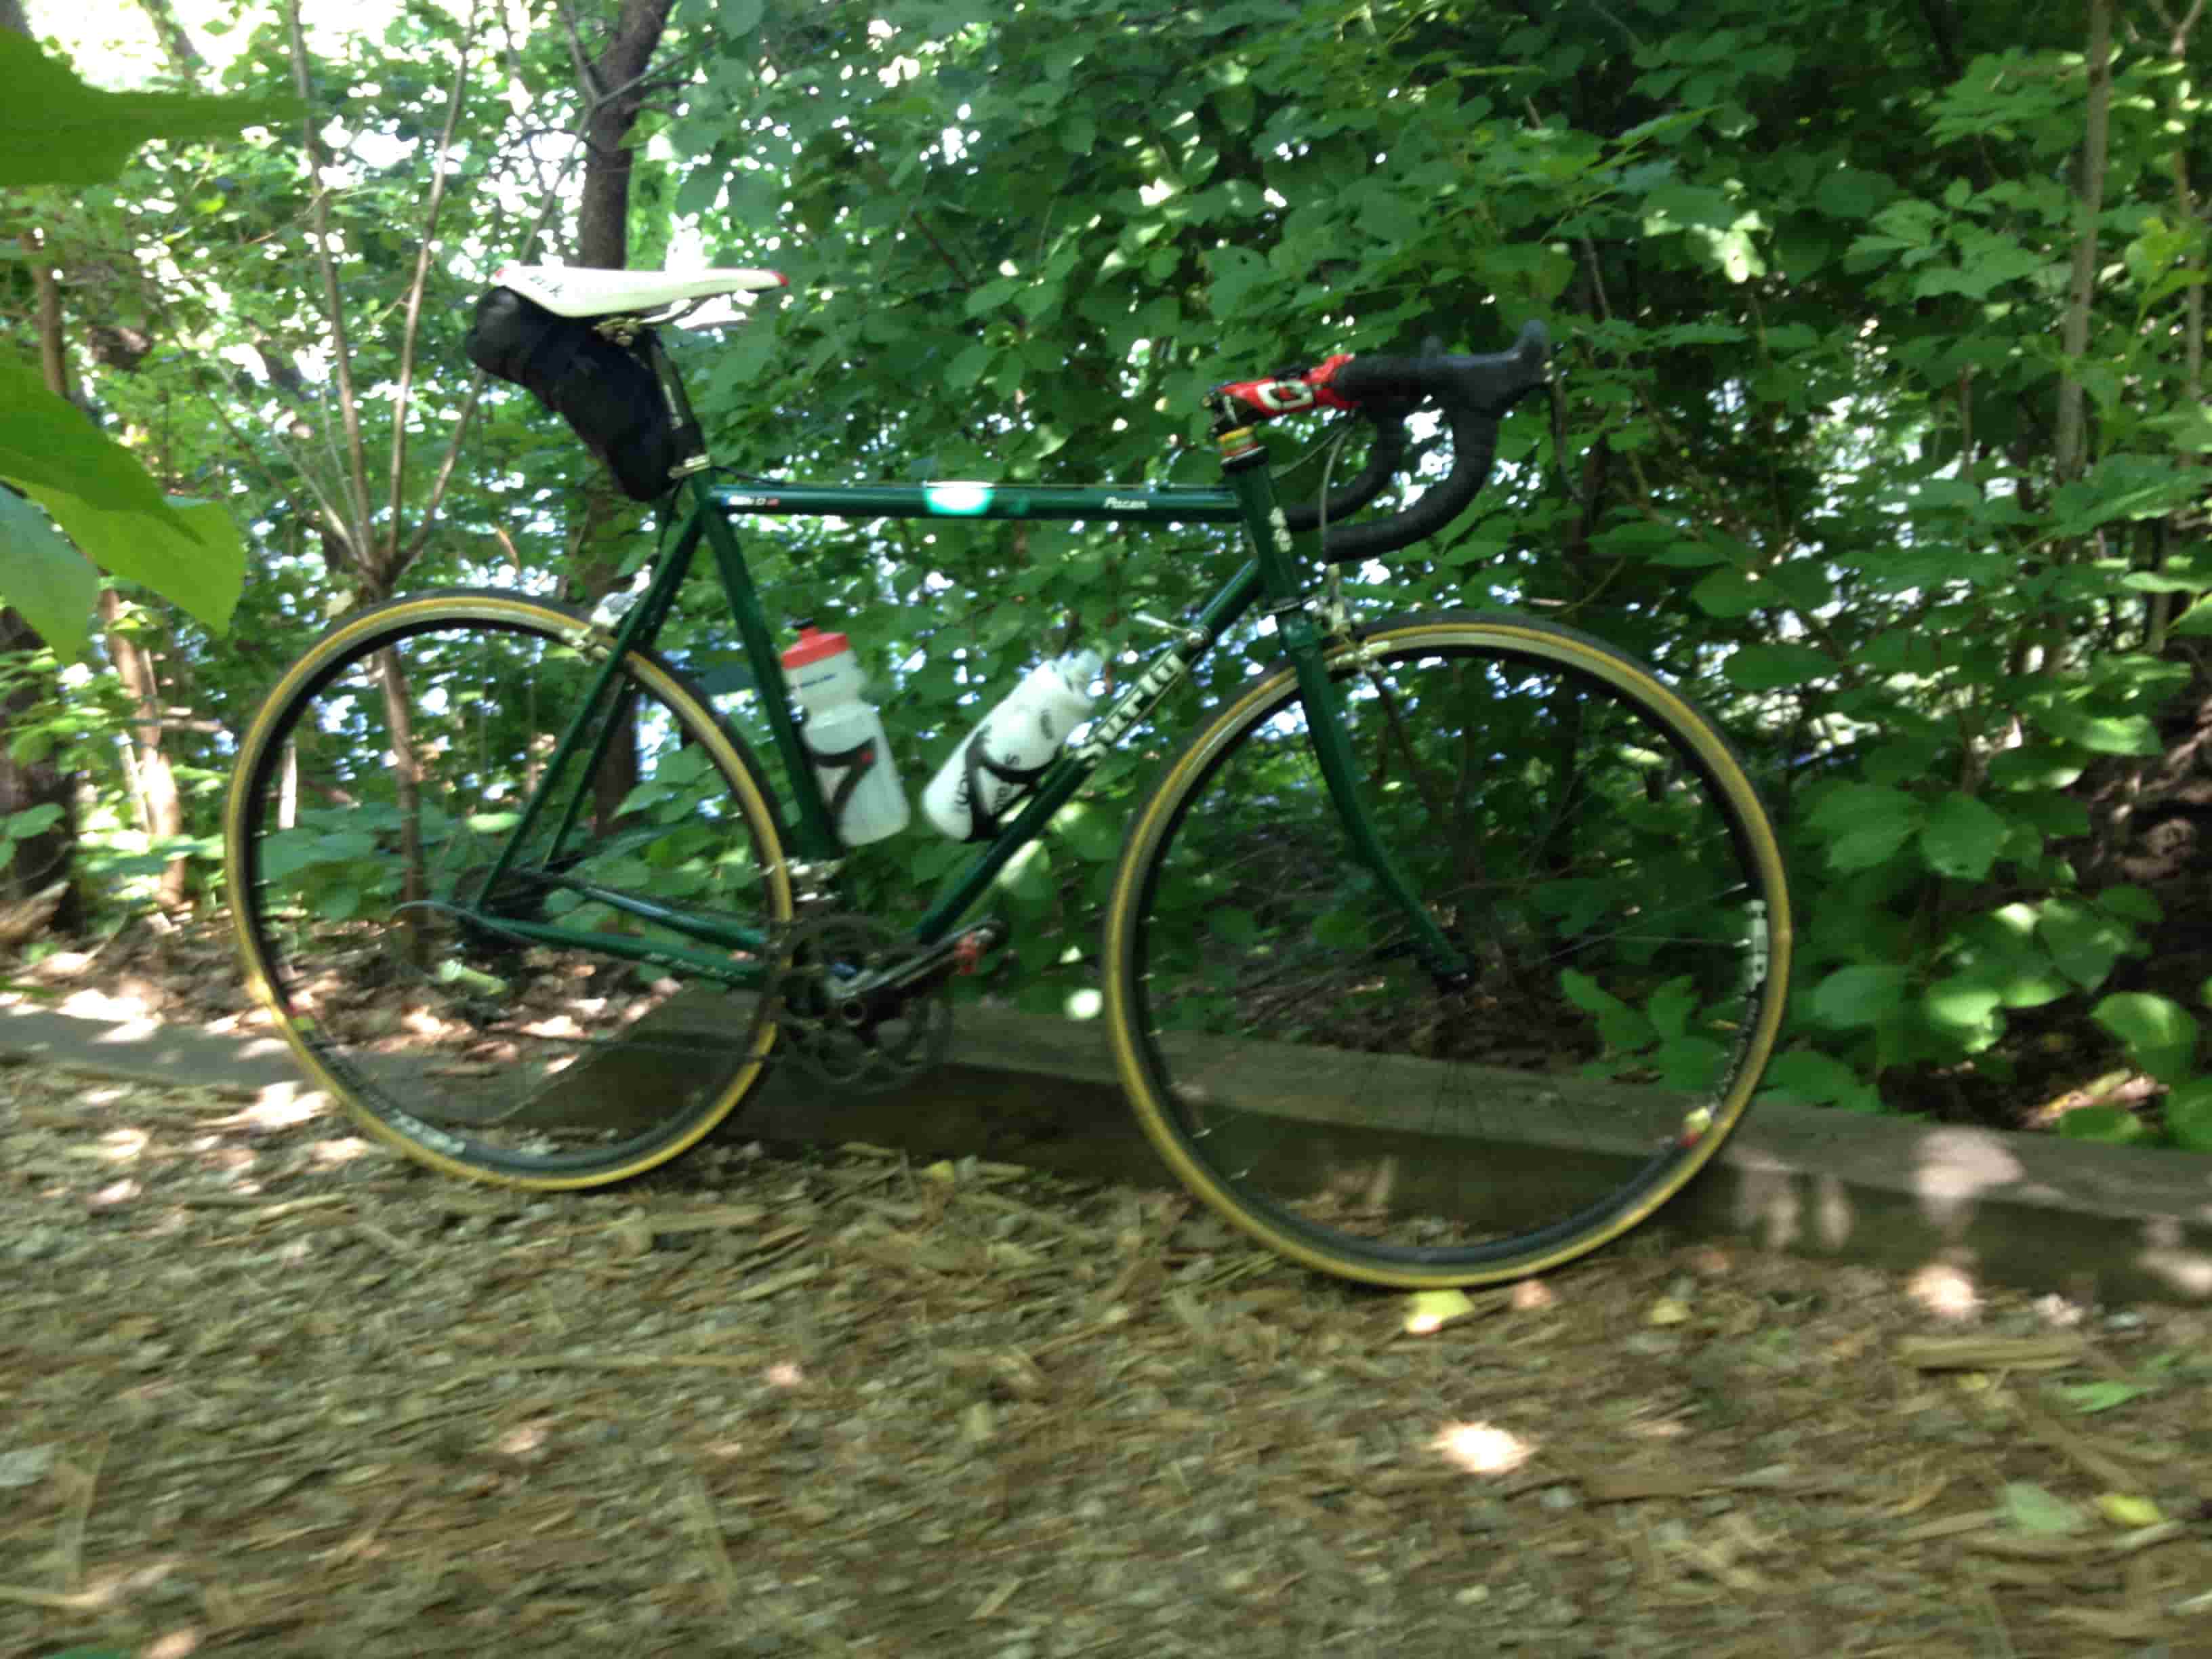 Right side view of a green Surly Pacer bike, parked in front of tall green bushes